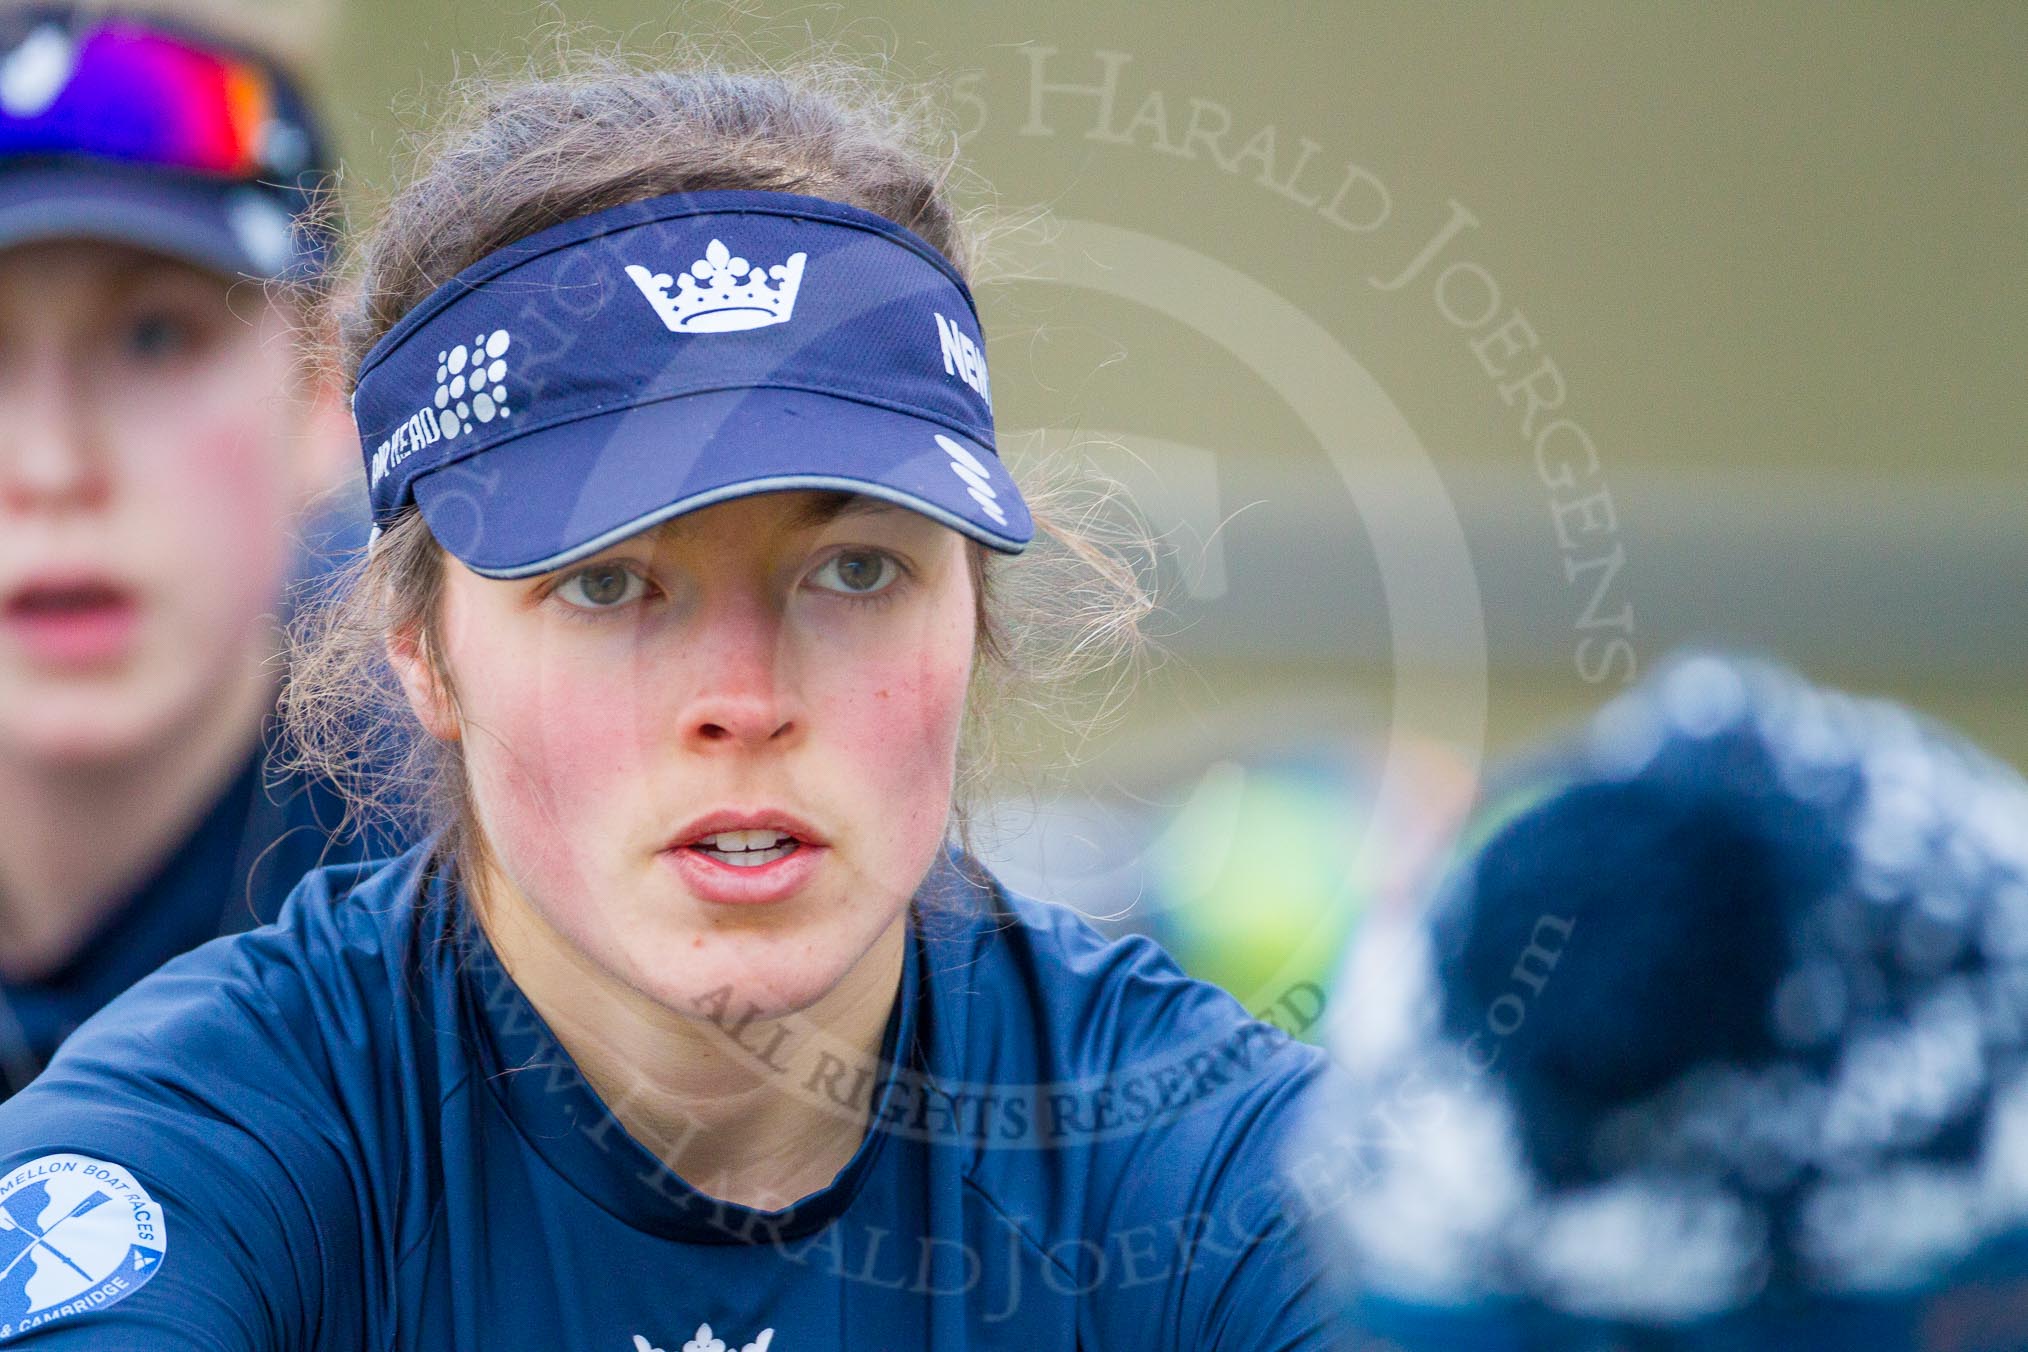 The Boat Race season 2016 - OUWBC training Wallingford: Lauren Kedar, stroke in the OUWBC Blue Boat.
River Thames,
Wallingford,
Oxfordshire,

on 29 February 2016 at 16:32, image #122